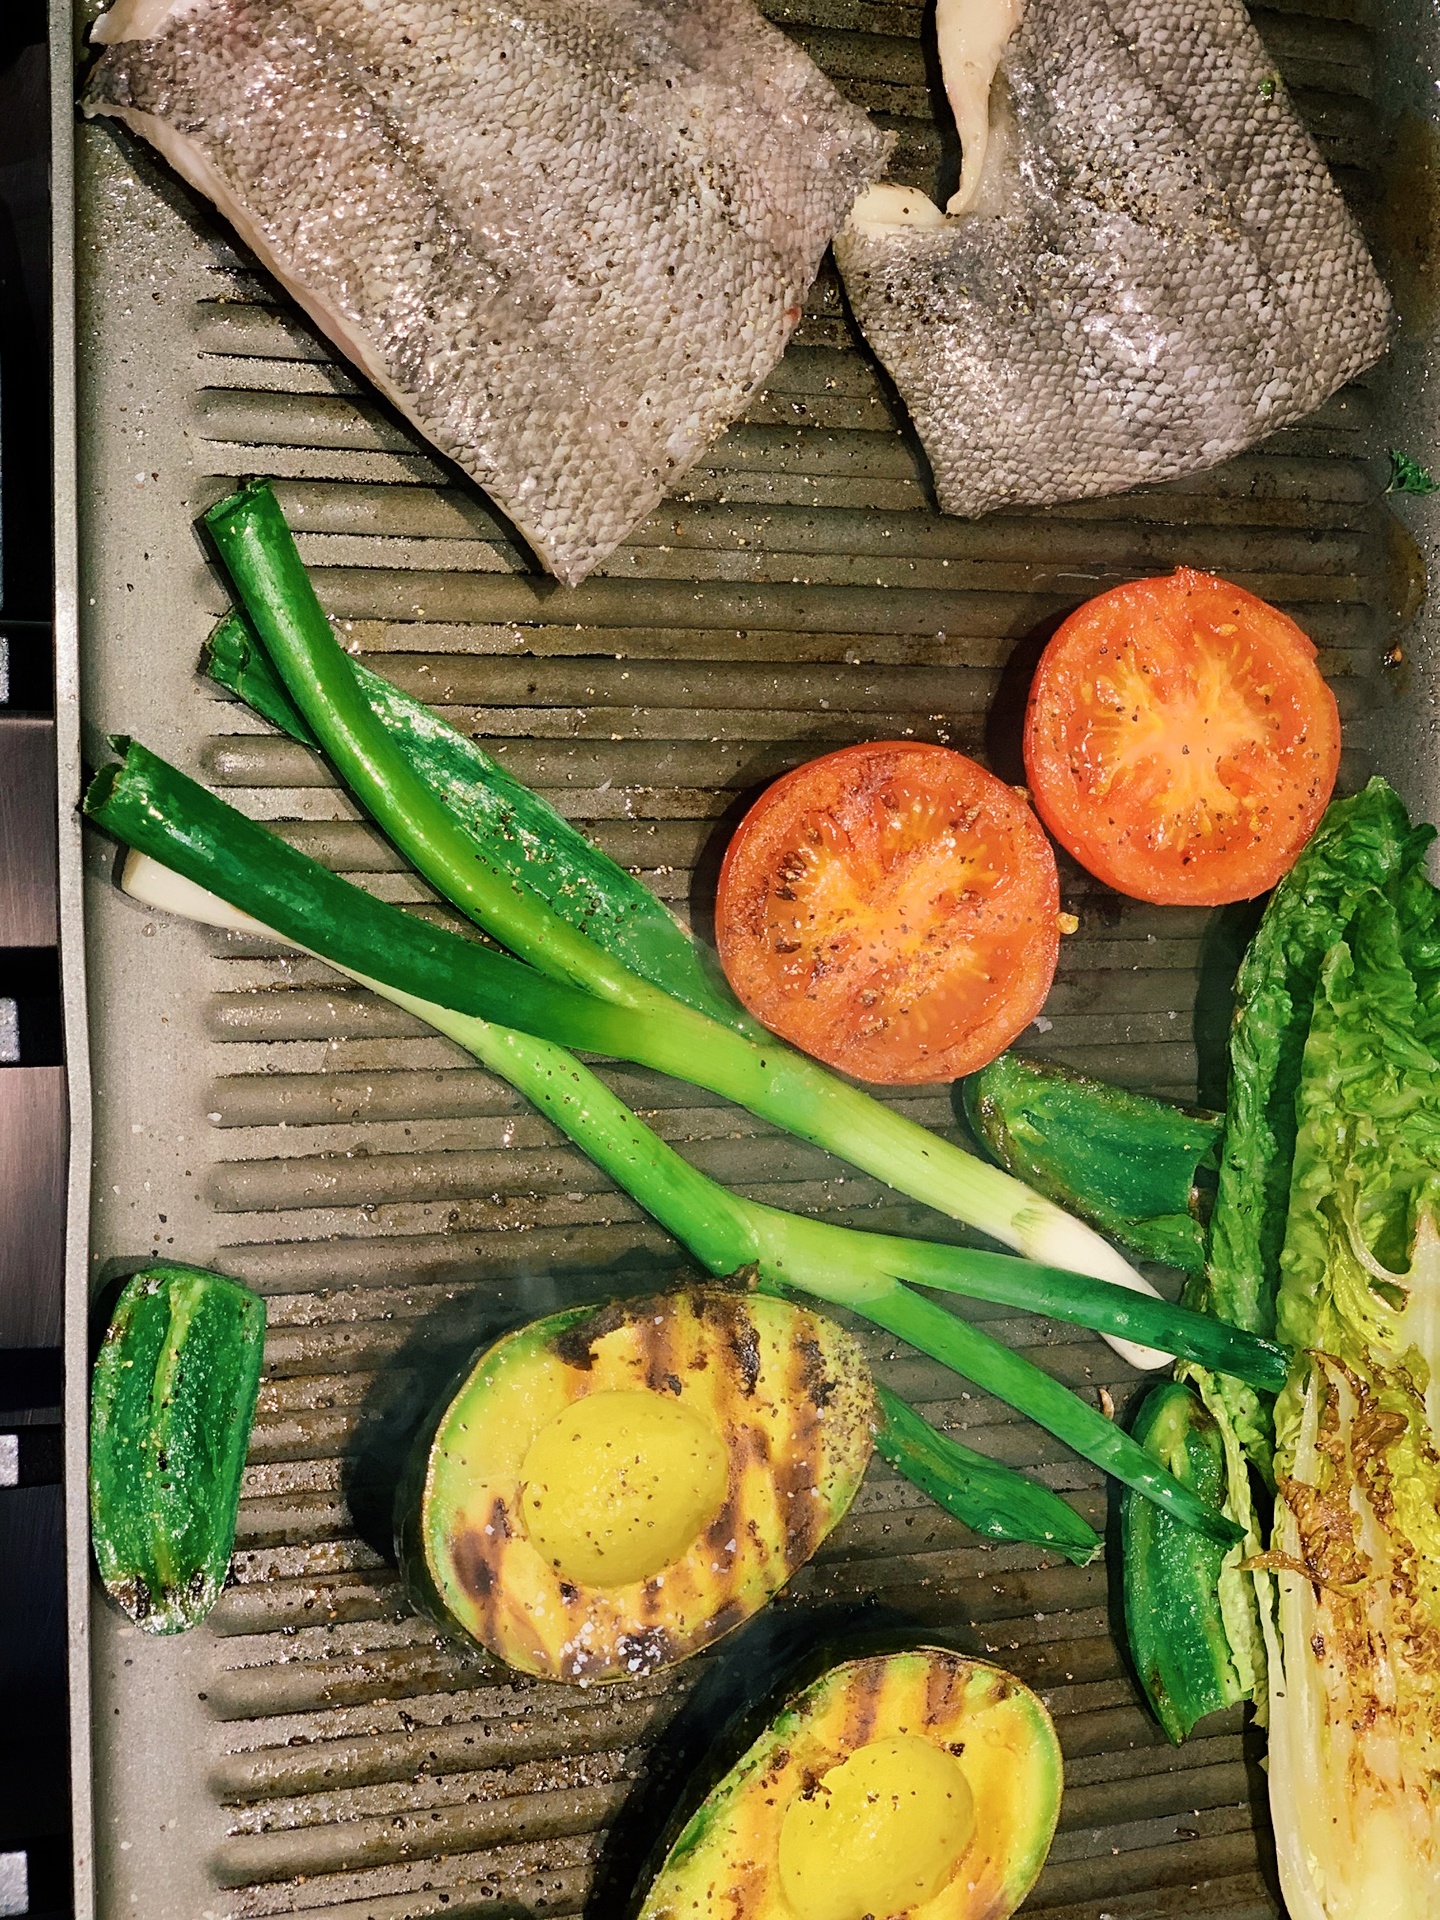 Veggies on grill pan with fish